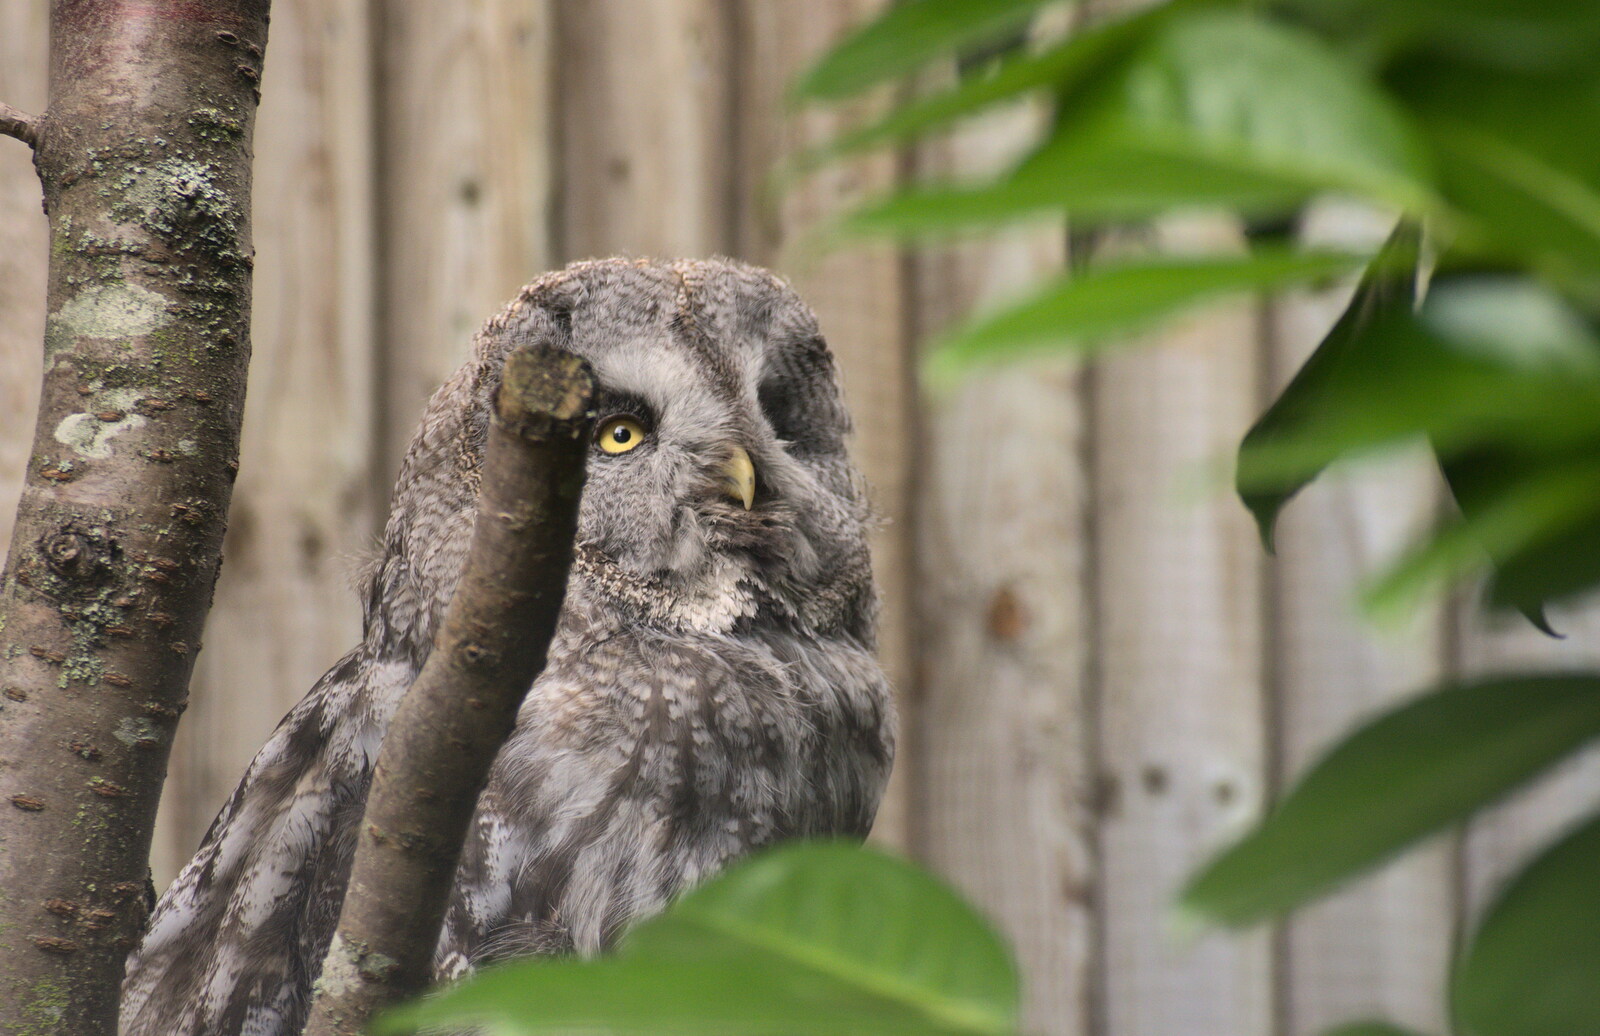 An owl that looks vaguely like Predator from Tiger Cubs at Banham Zoo, Banham, Norfolk - 6th August 2013